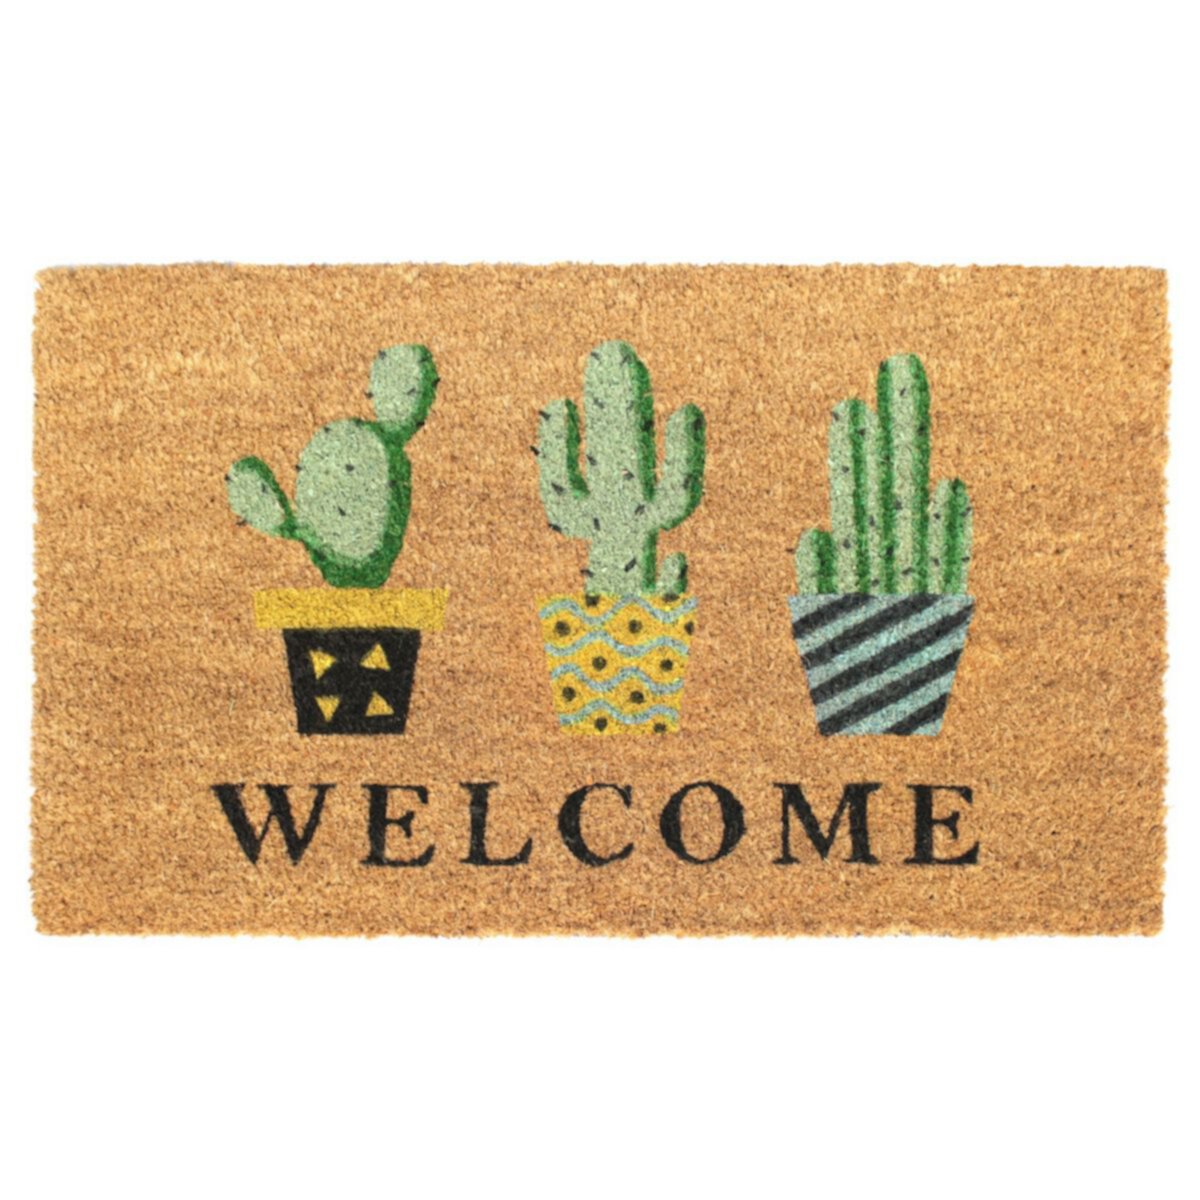 RugSmith Welcome Topiary Doormat - 18'' x 30'' RugSmith